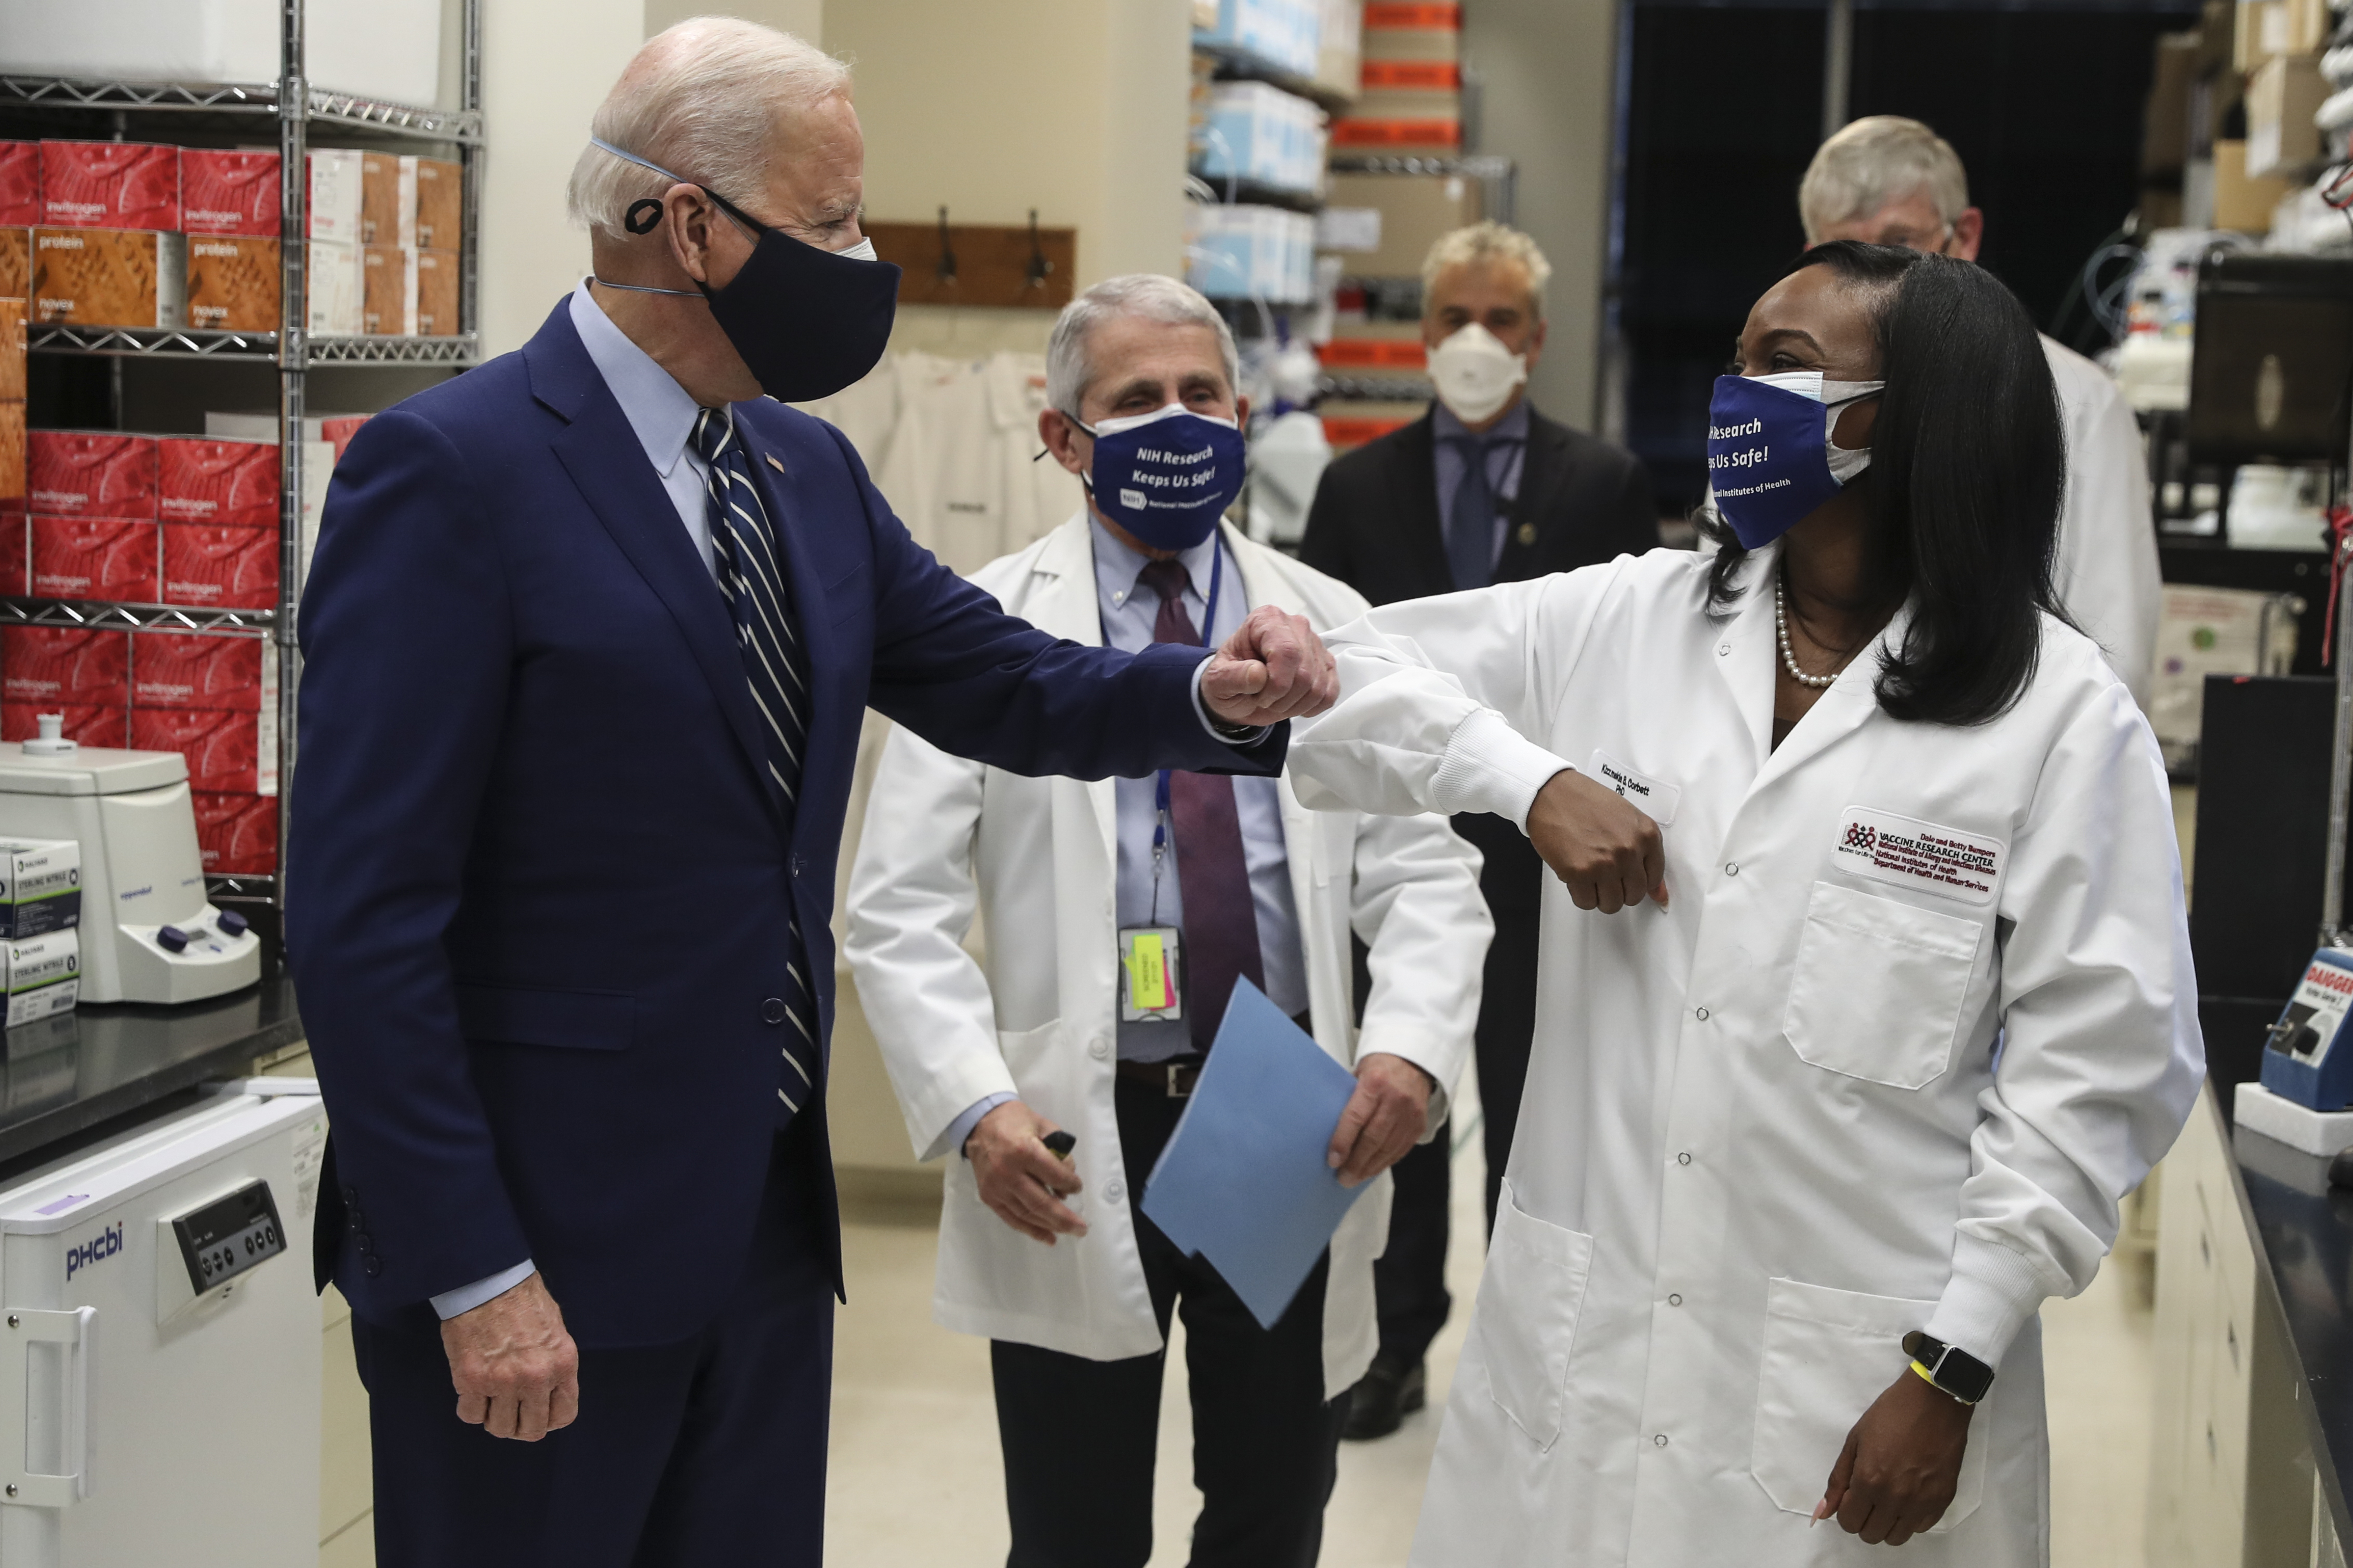 Biden visits the National Institutes of Health